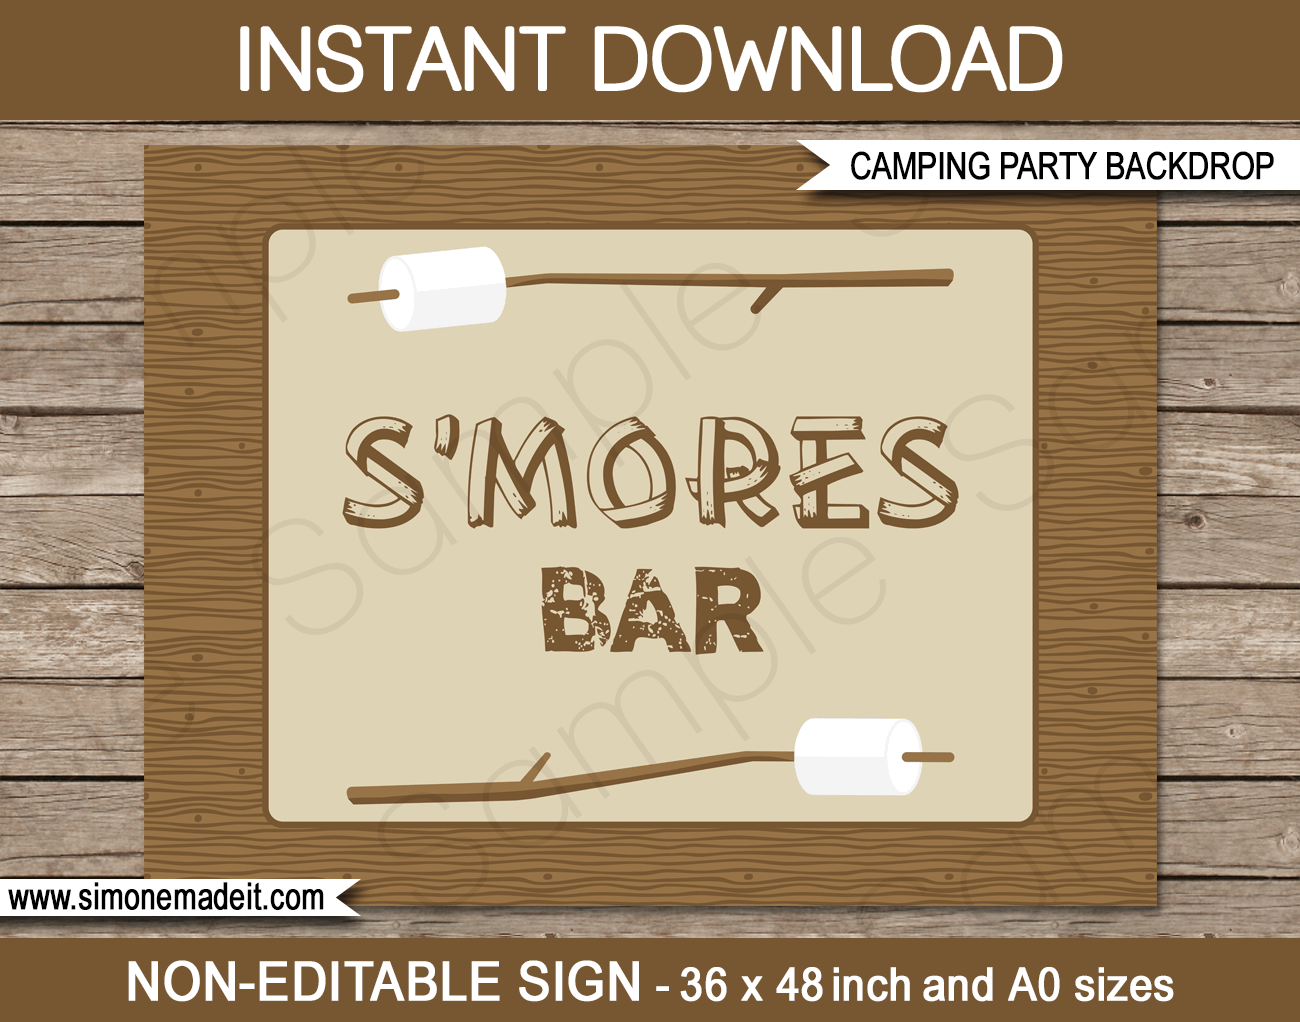 Printable Camping Party S'mores Bar Backdrop | DIY Template | Party Decorations | 36x48 inches | A0 | $4.50 Instant Download via SIMONEmadeit.com